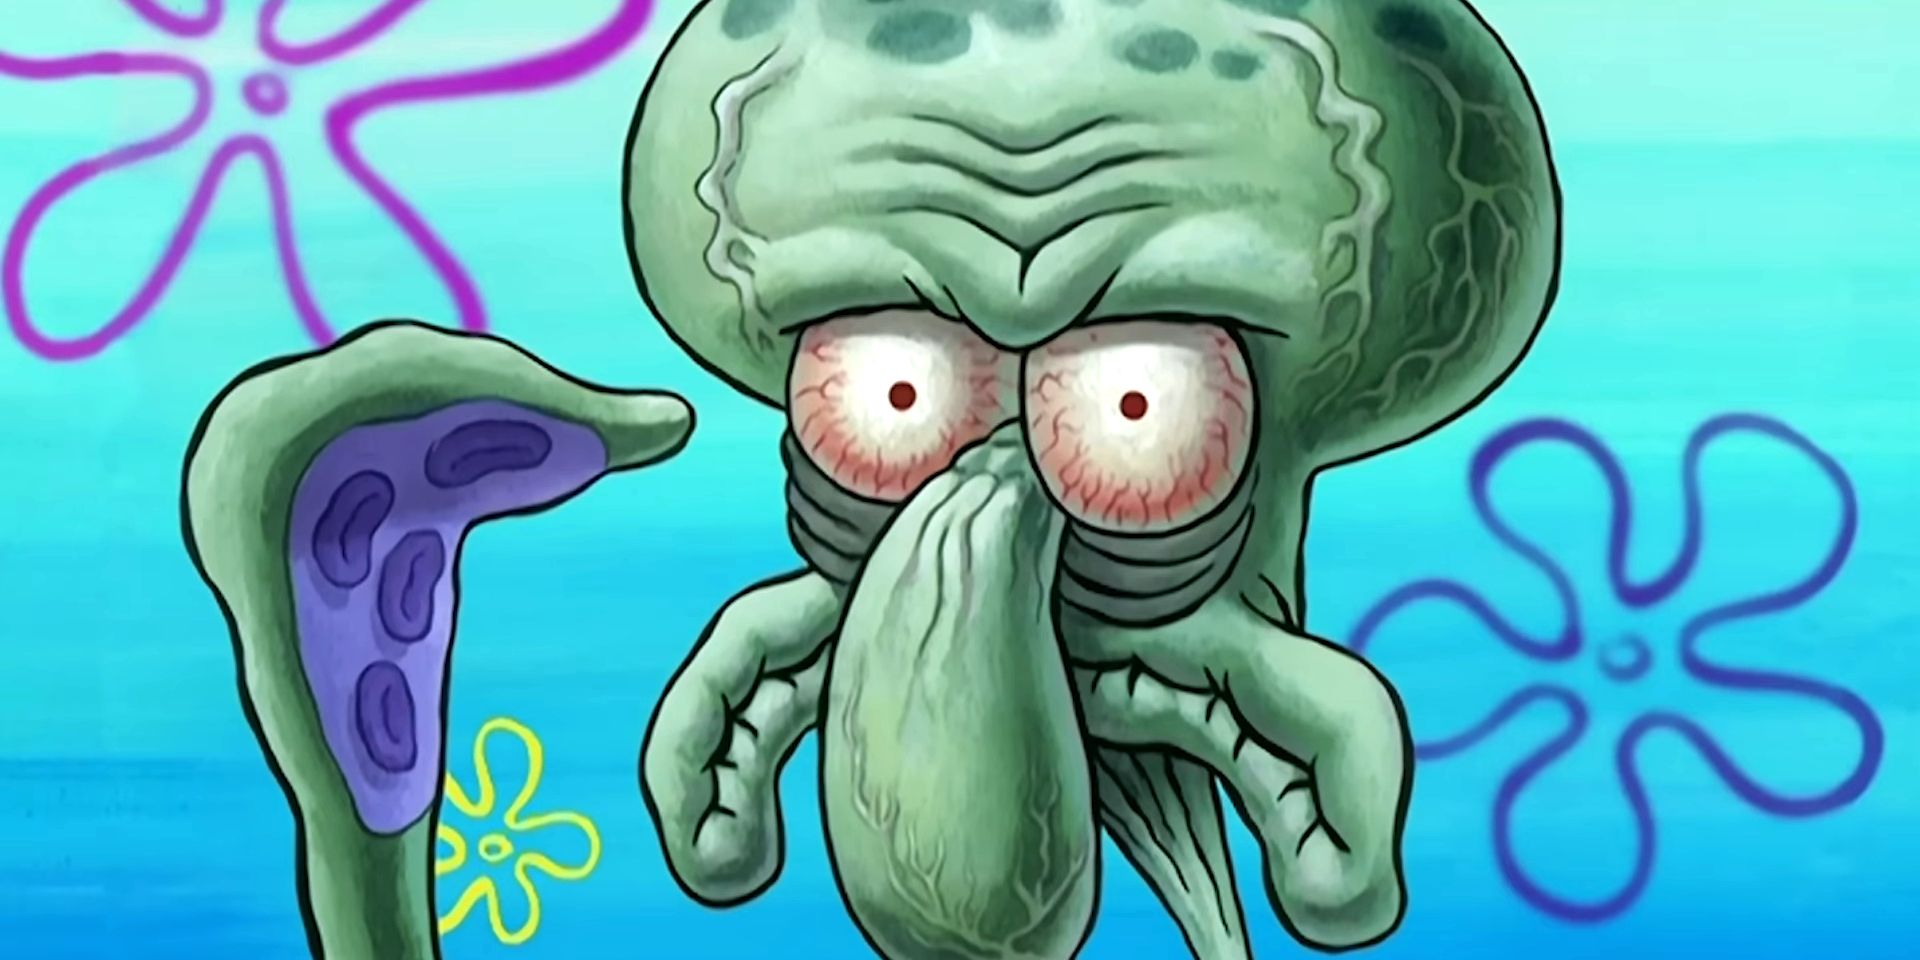 SpongeBob Cosplay Brings Squidward To Life With Unsettlingly